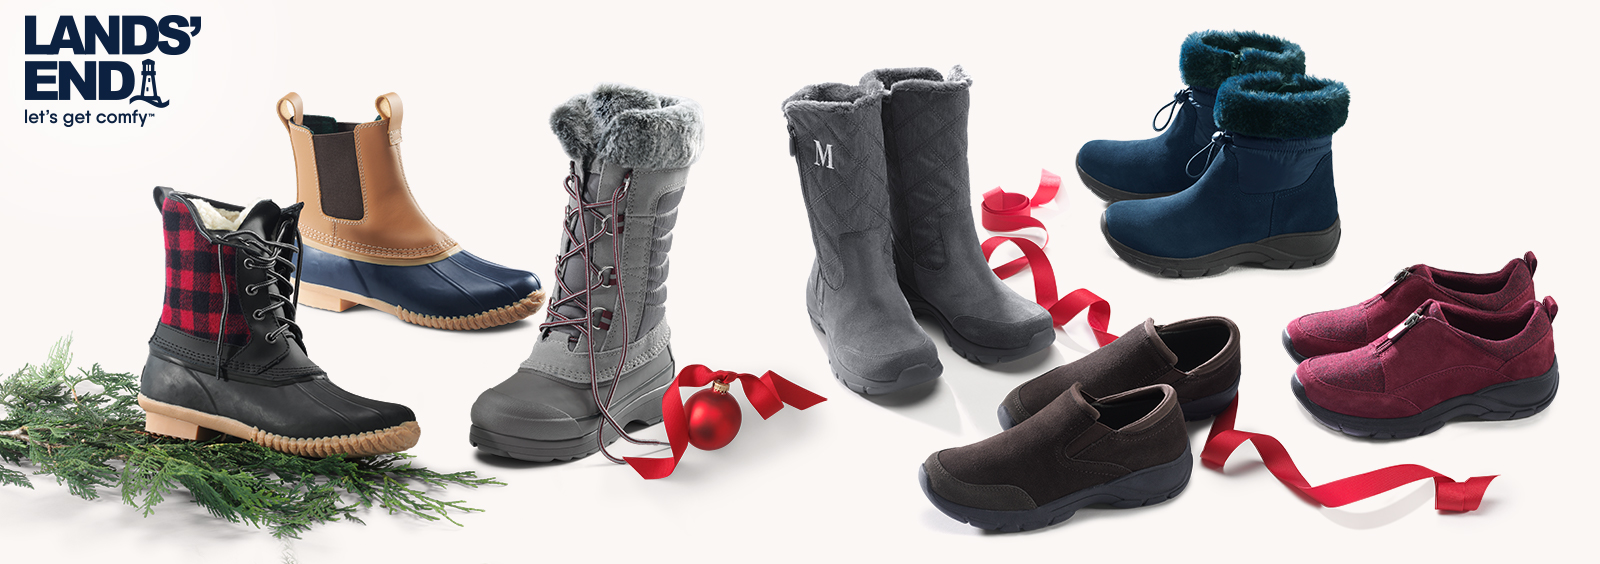 How to Choose the Best Winter Boots